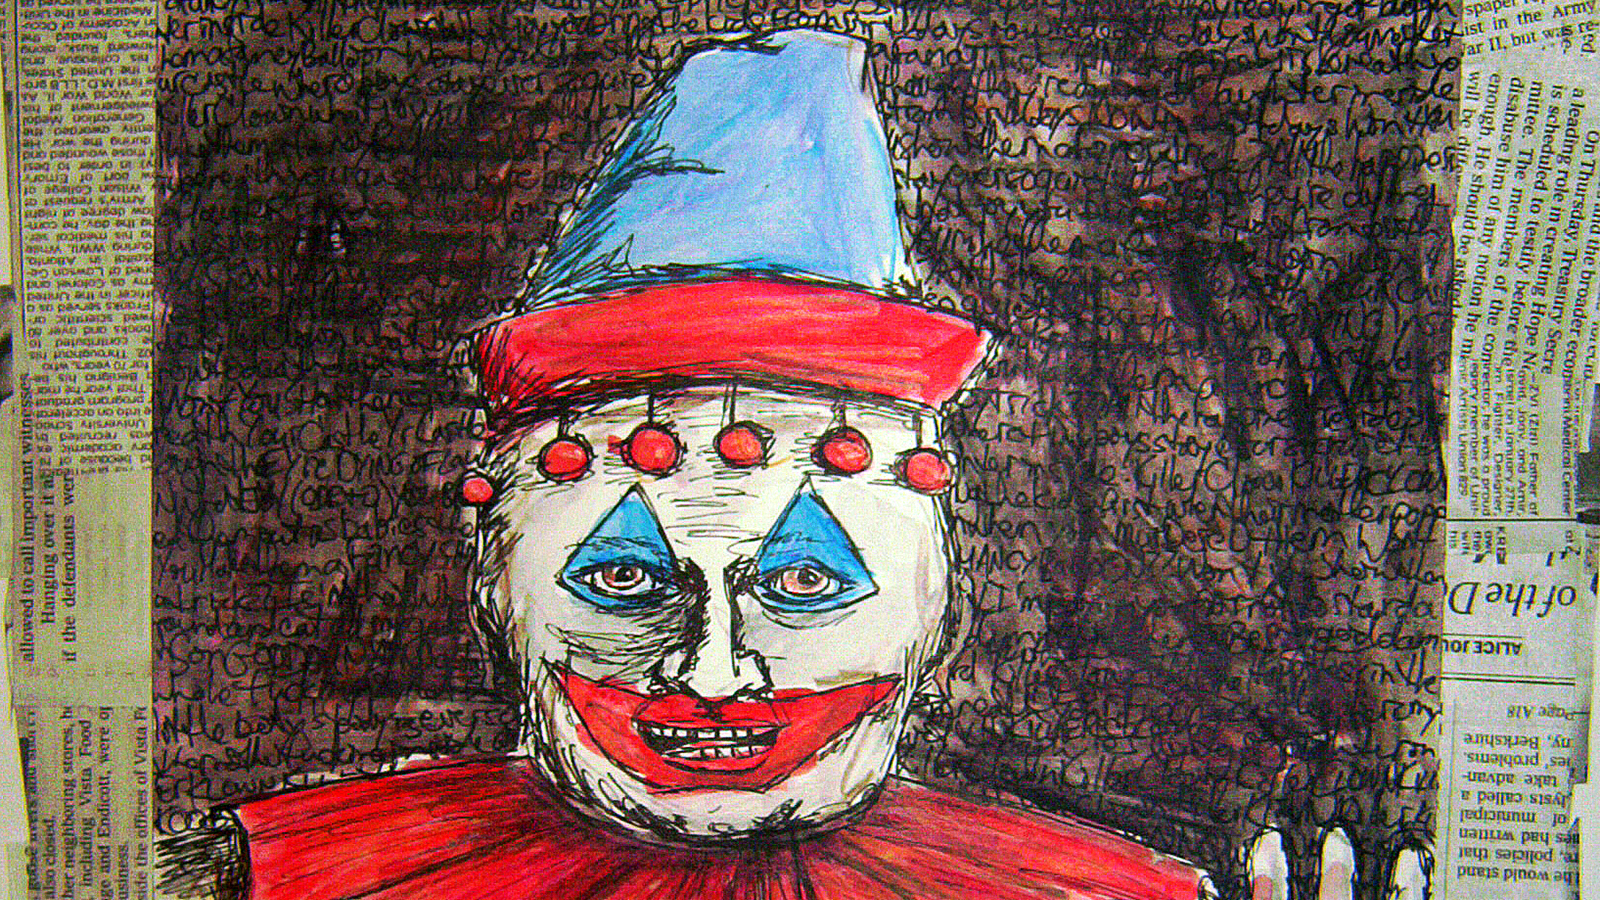 a drawing of a clown wearing a red and blue hat.